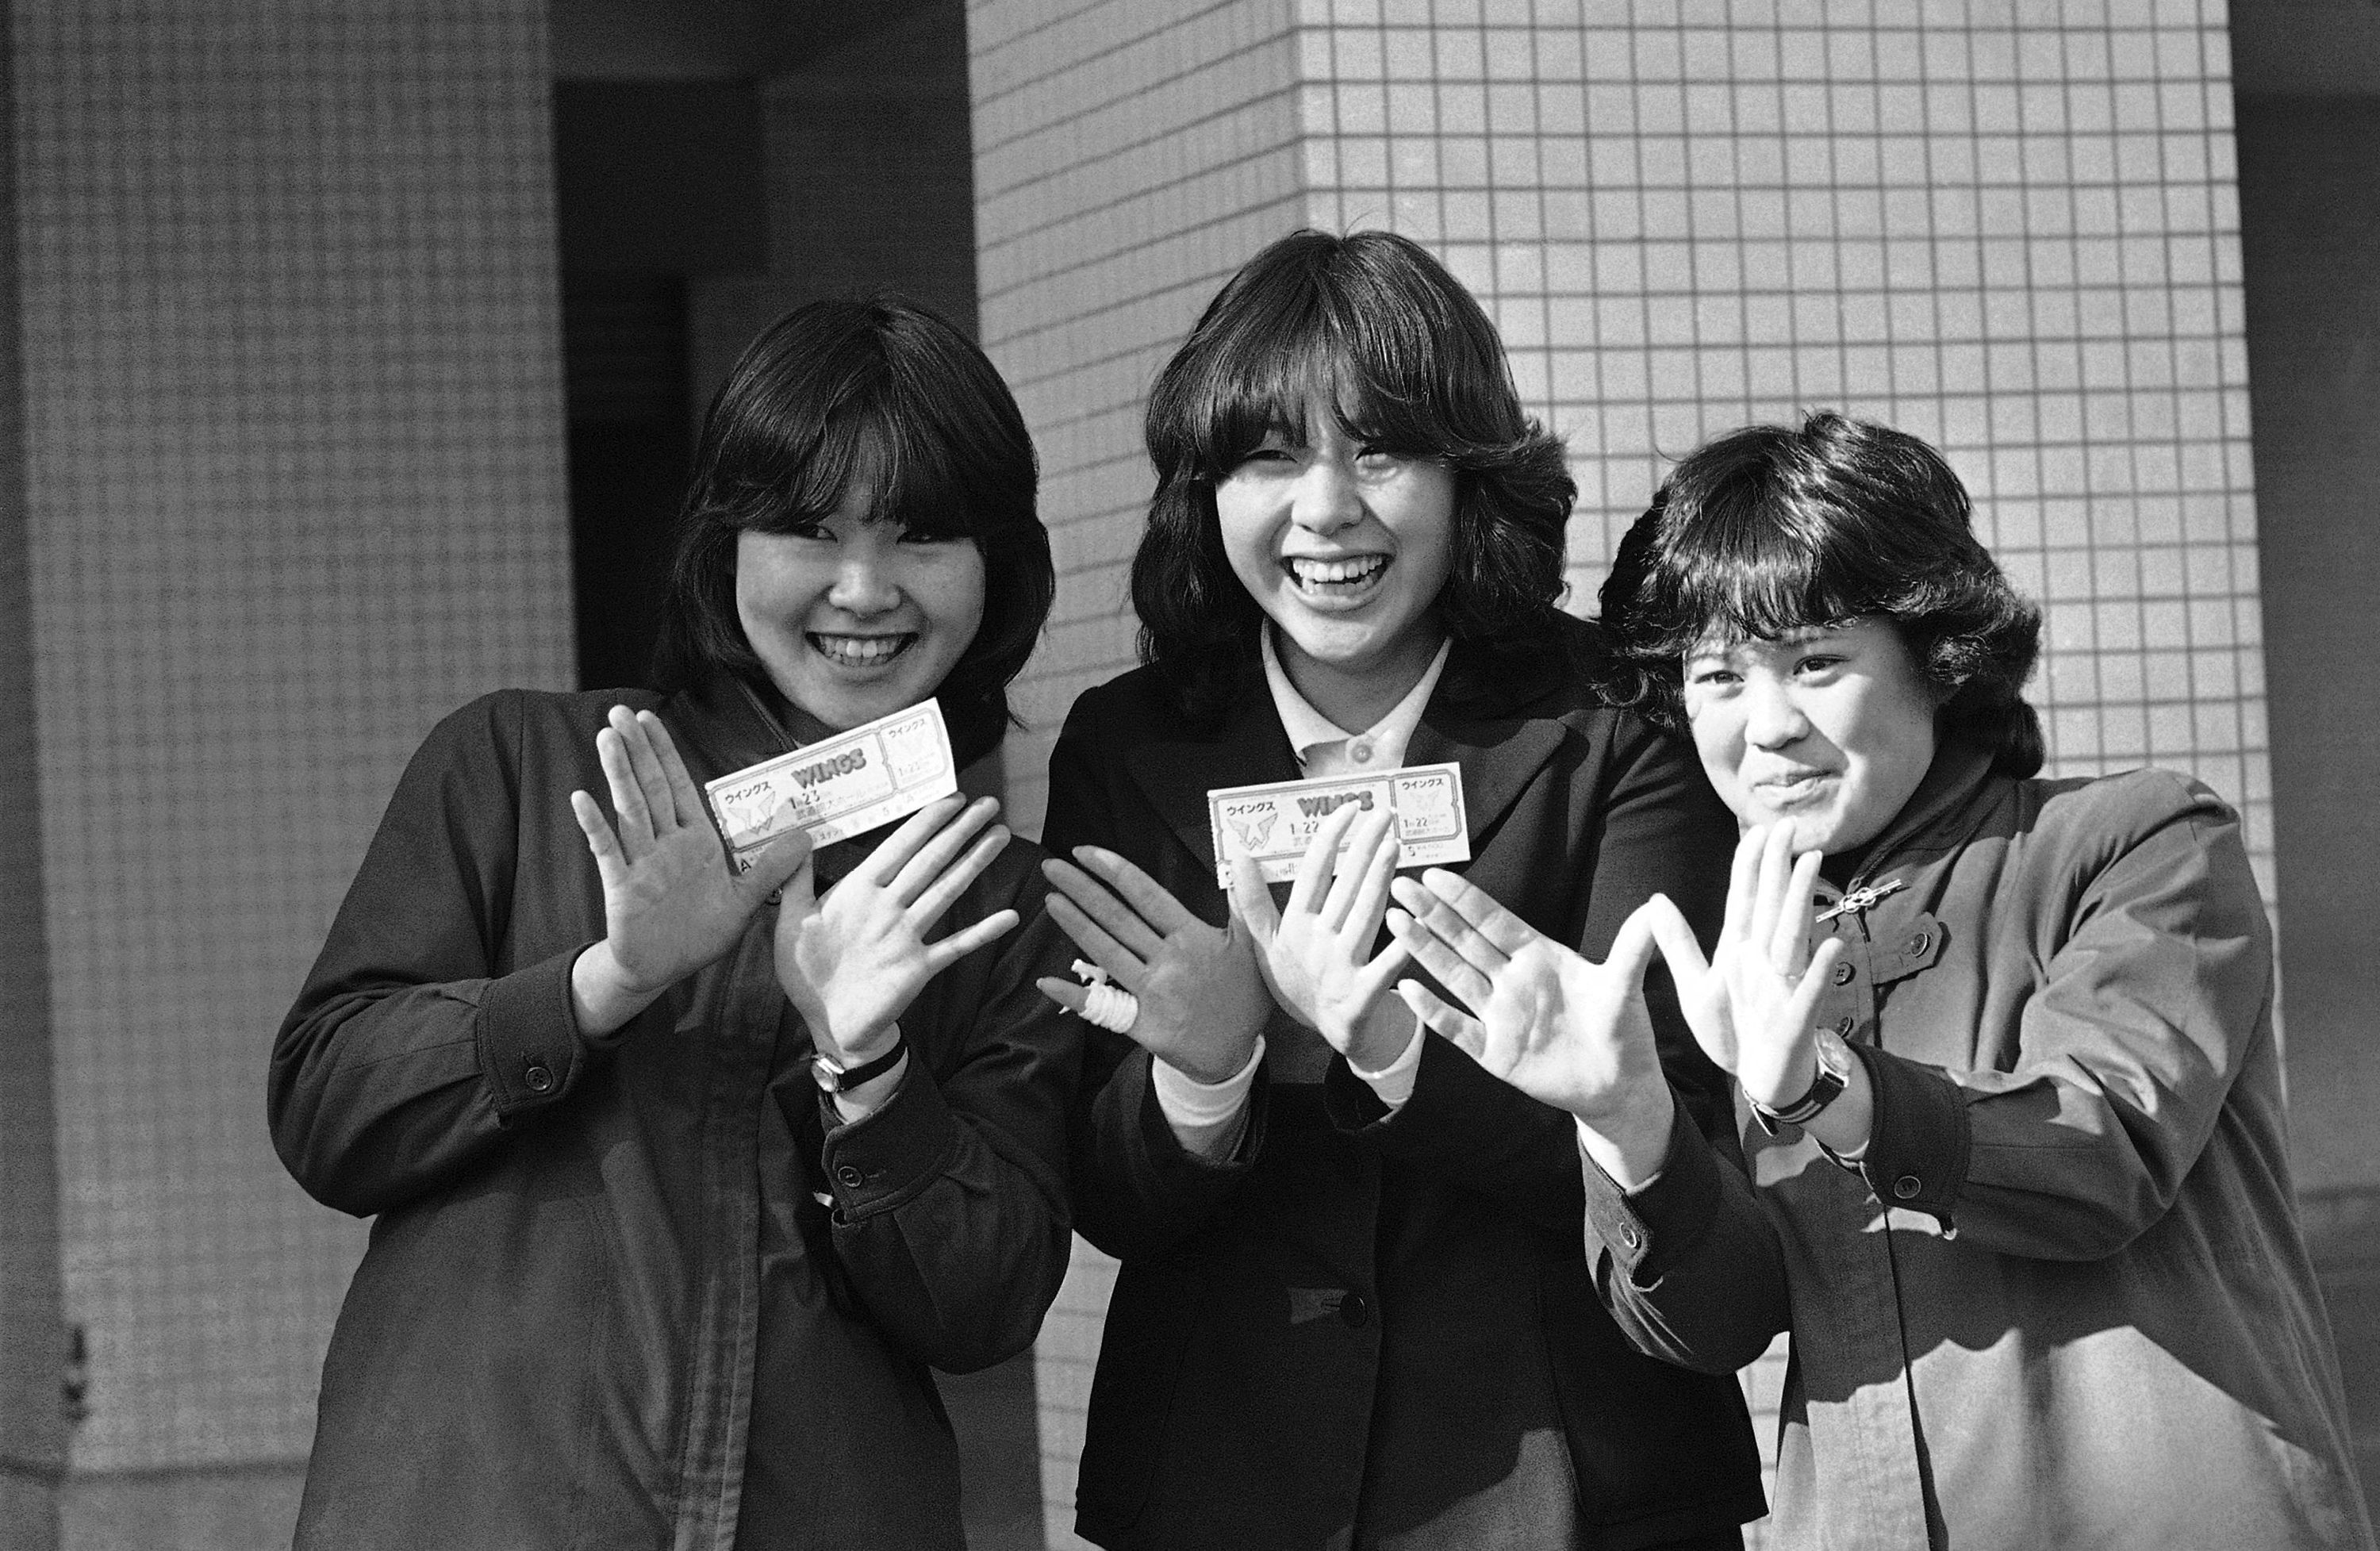 3 Japanese teens show the Wings sign and also show their tickets to a cancelled Wings concert in Toyko, Japan in 1980. The concert was cancelled when Paul McCartney was arrested at the airport after he was found with marijuana in his luggage. The tickets cost around $20 USD at the time. These fans loved Wings, but when the journalist asked them if they also liked The Beatles, the young girls had little to no clue about McCartney's former band.